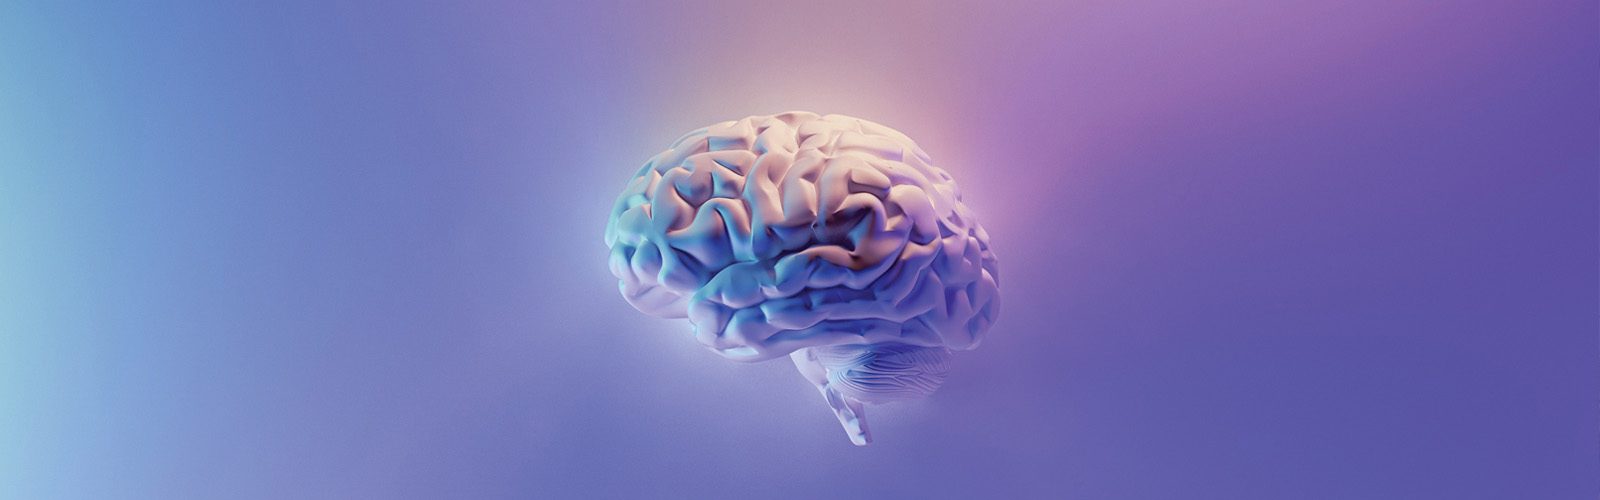 image of a three dimensional brain with a blue and purple gradient behind